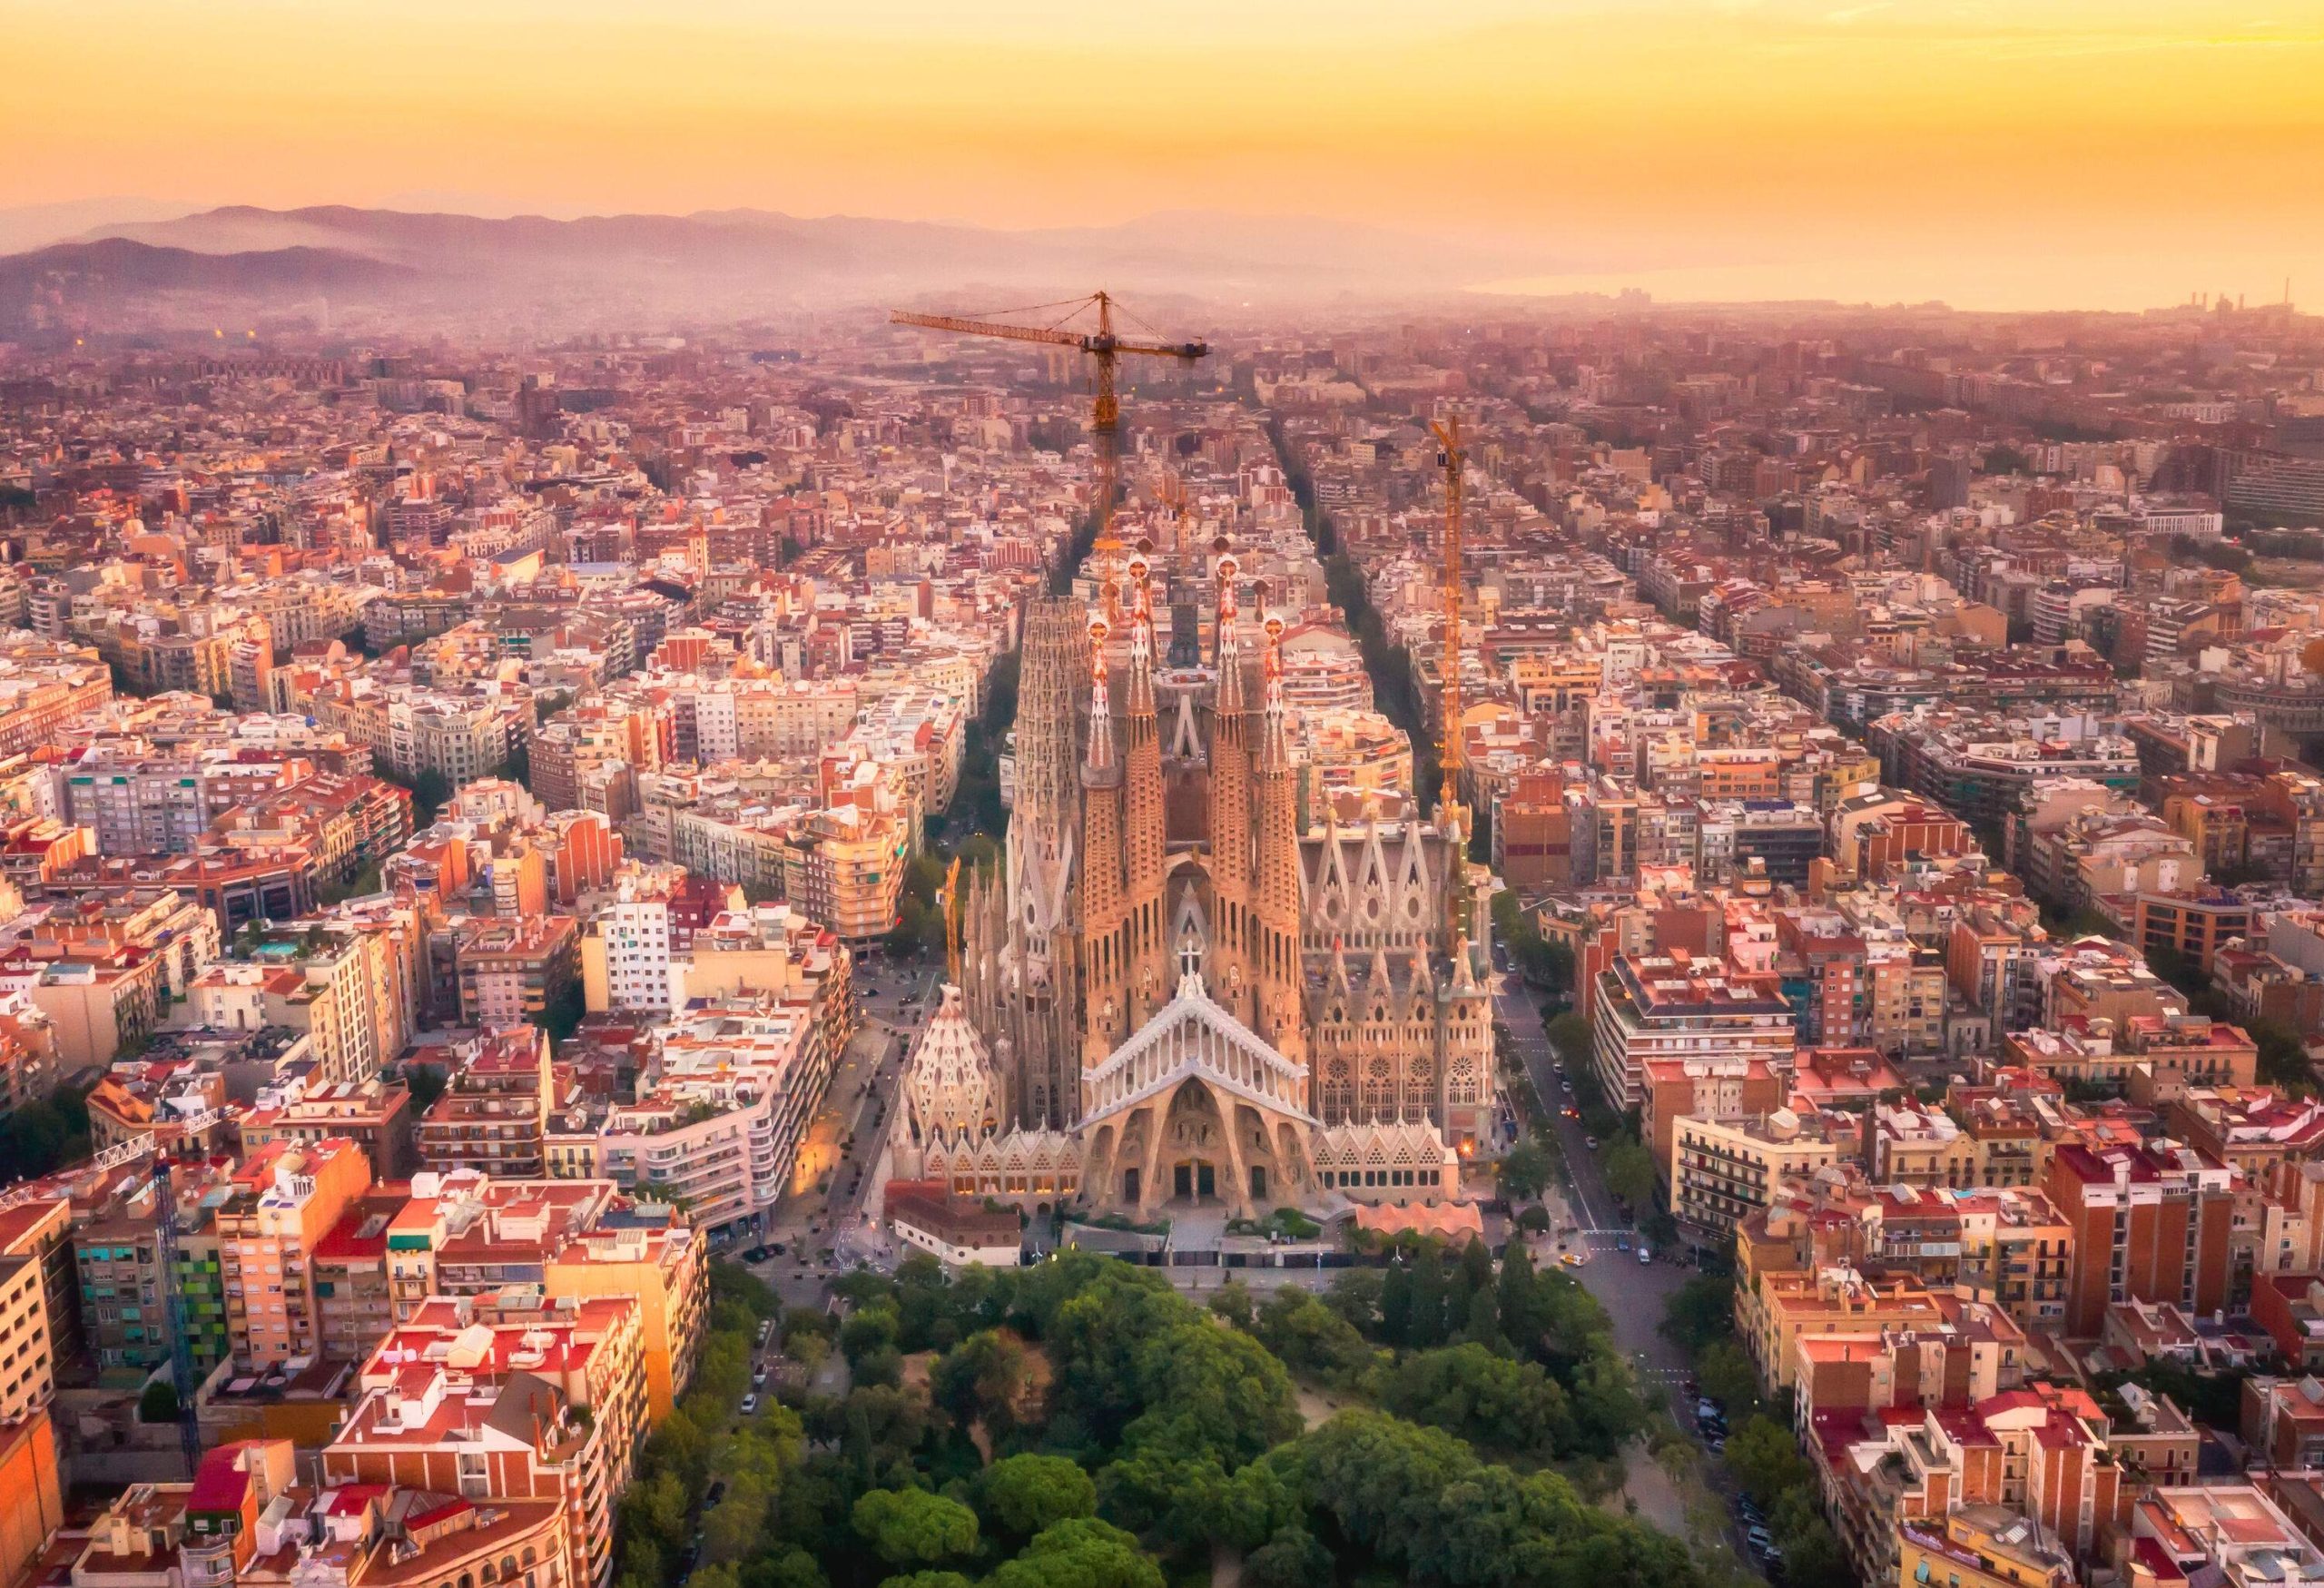 Stunning city skyline of Barcelona with the Sagrada Familia in the centre.